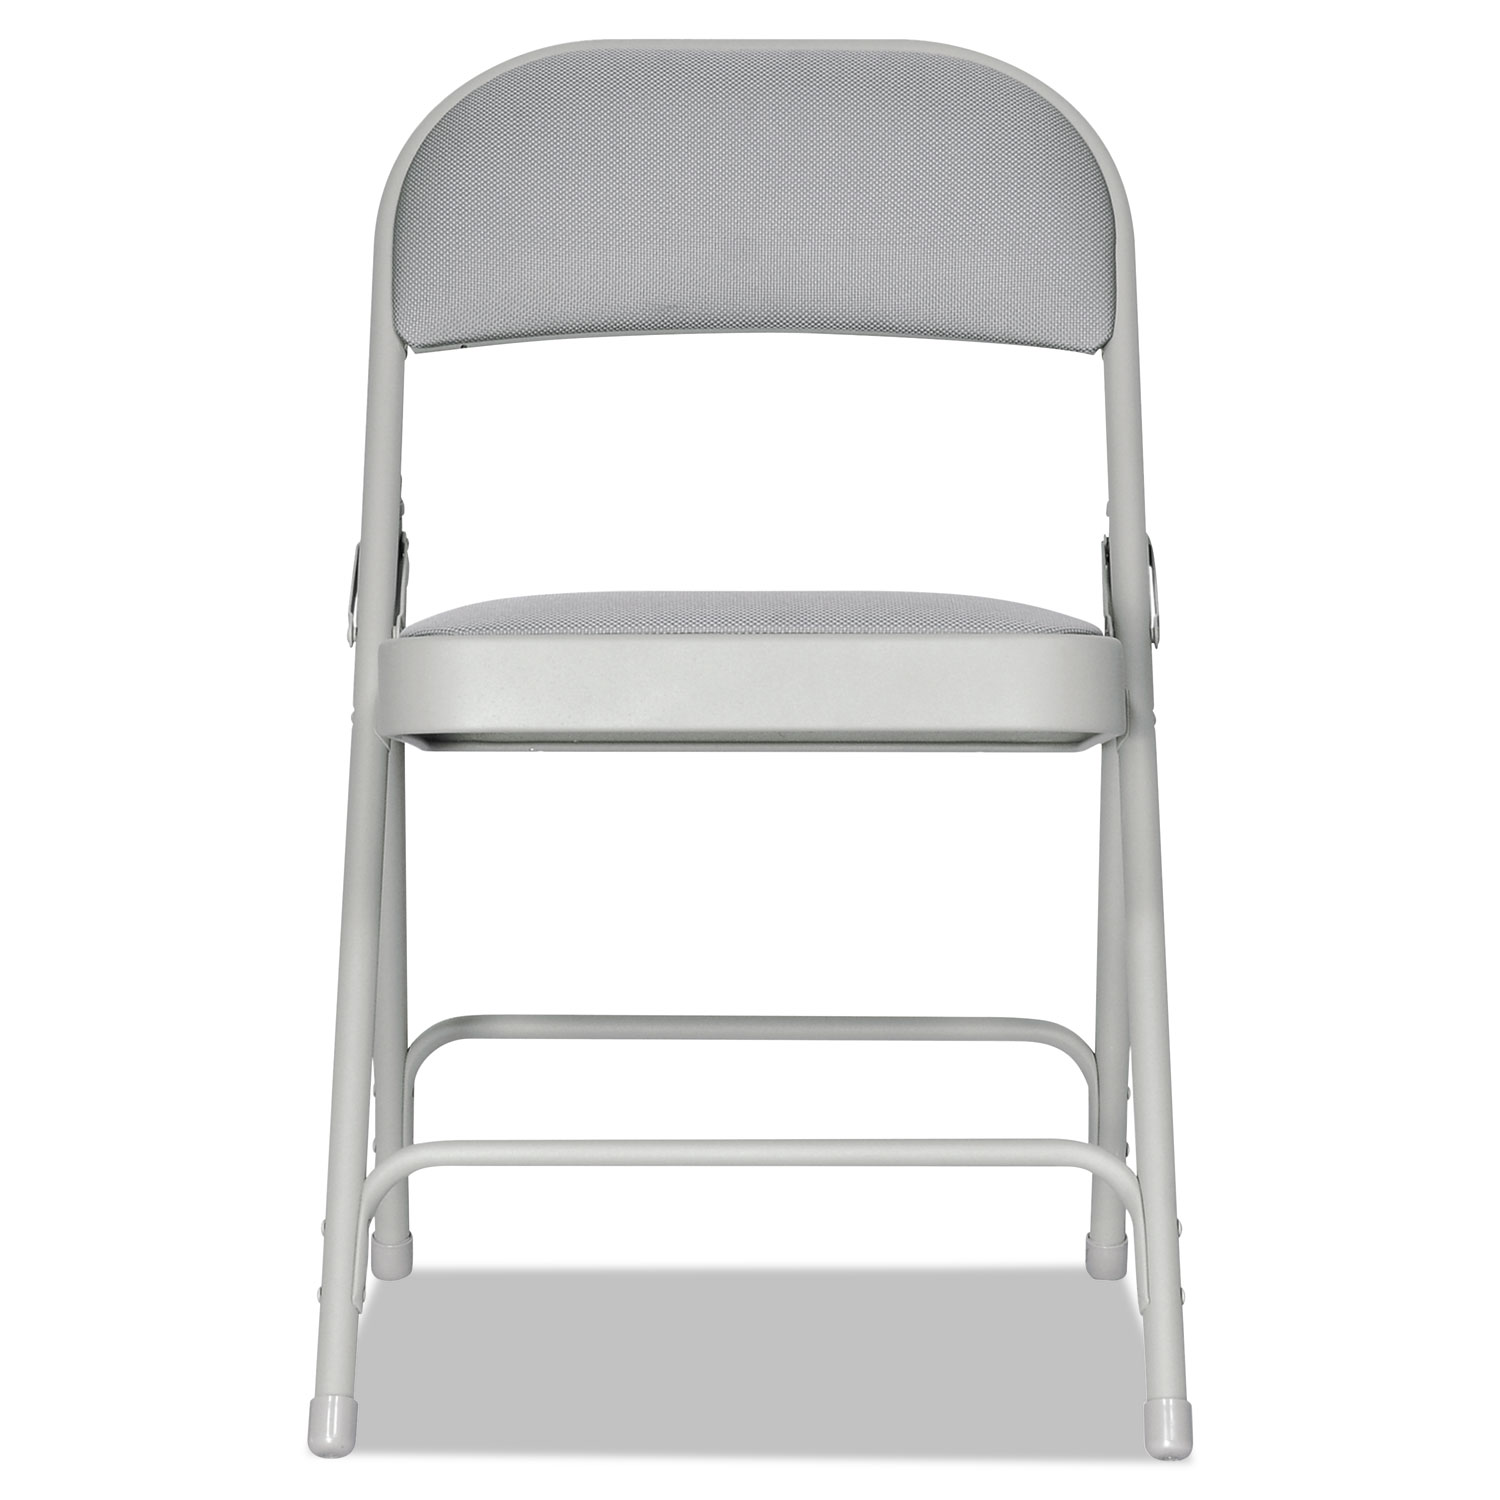 Steel Folding Chair with Two-Brace Support, Fabric Back/Seat, Light Gray, 4/CT